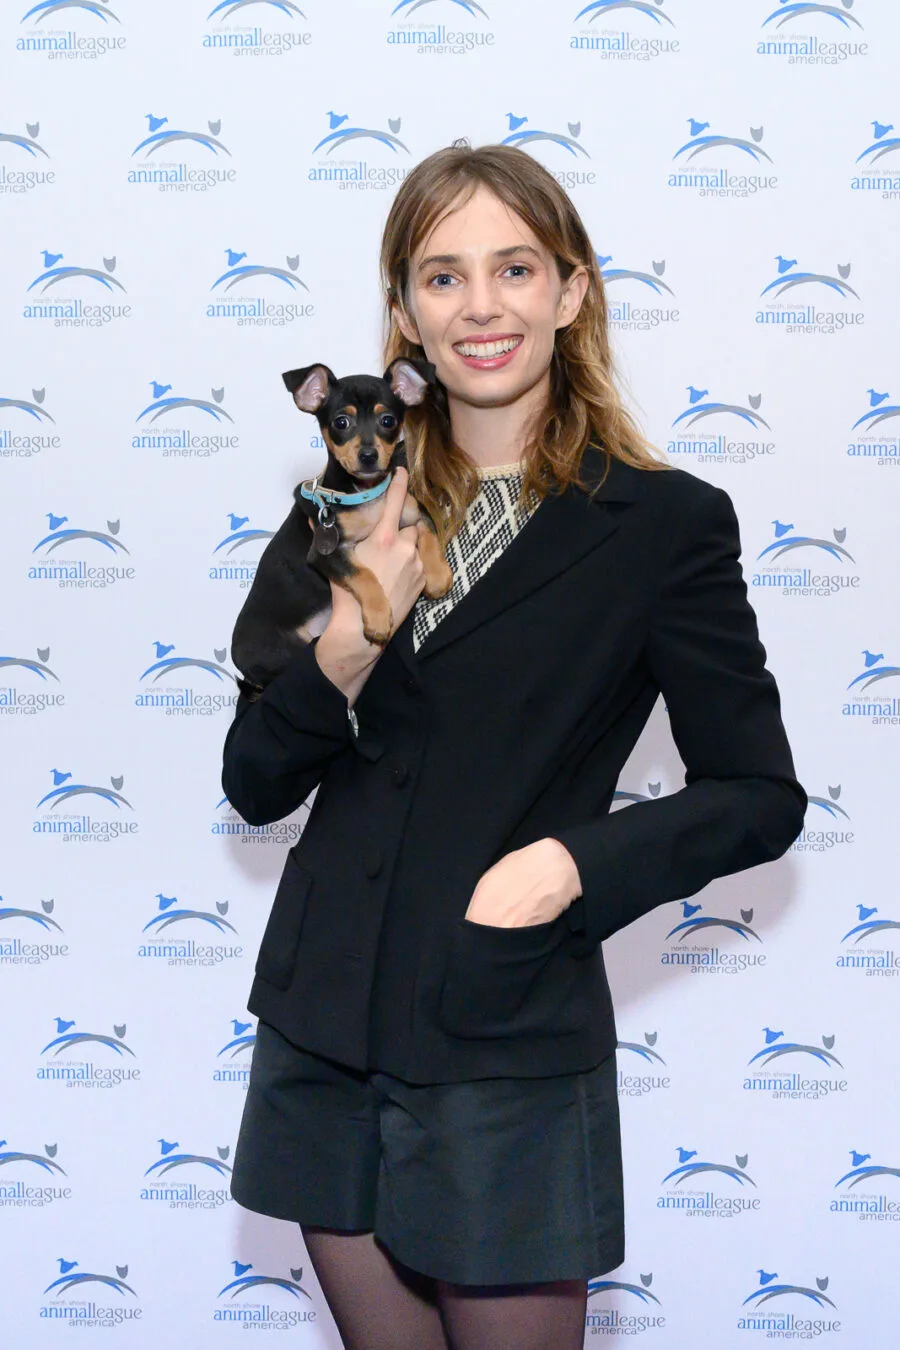 Actress/Singer-Songwriter MAYA HAWKE attends North Shore Animal League America’s CELEBRATION OF RESCUE. PHOTO CREDIT: AMY MAYES PHOTOGRAPHY